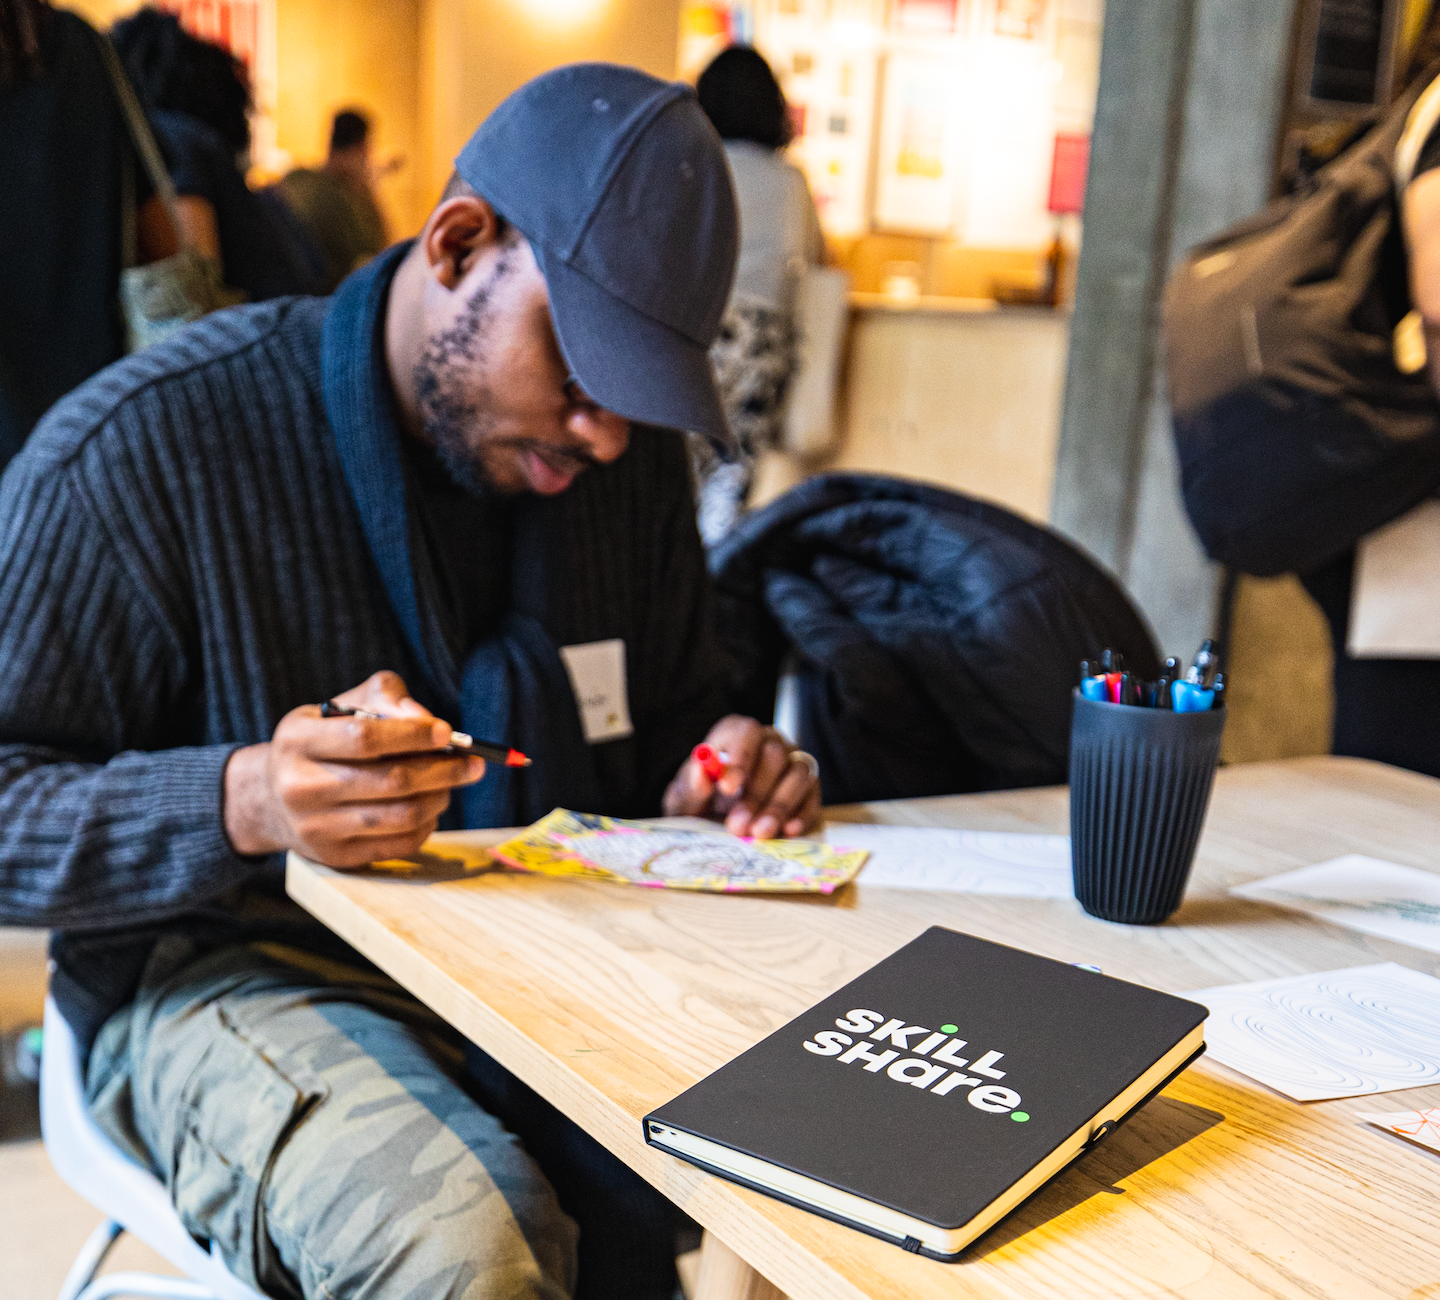 Black person with camouflage pants, navy sweater and navy ballcap, sitting at a table, looking down and doodling during the Skillshare UK Teacher Event. In front of him on the table, there's a cup with pens and a Skillshare notebook.